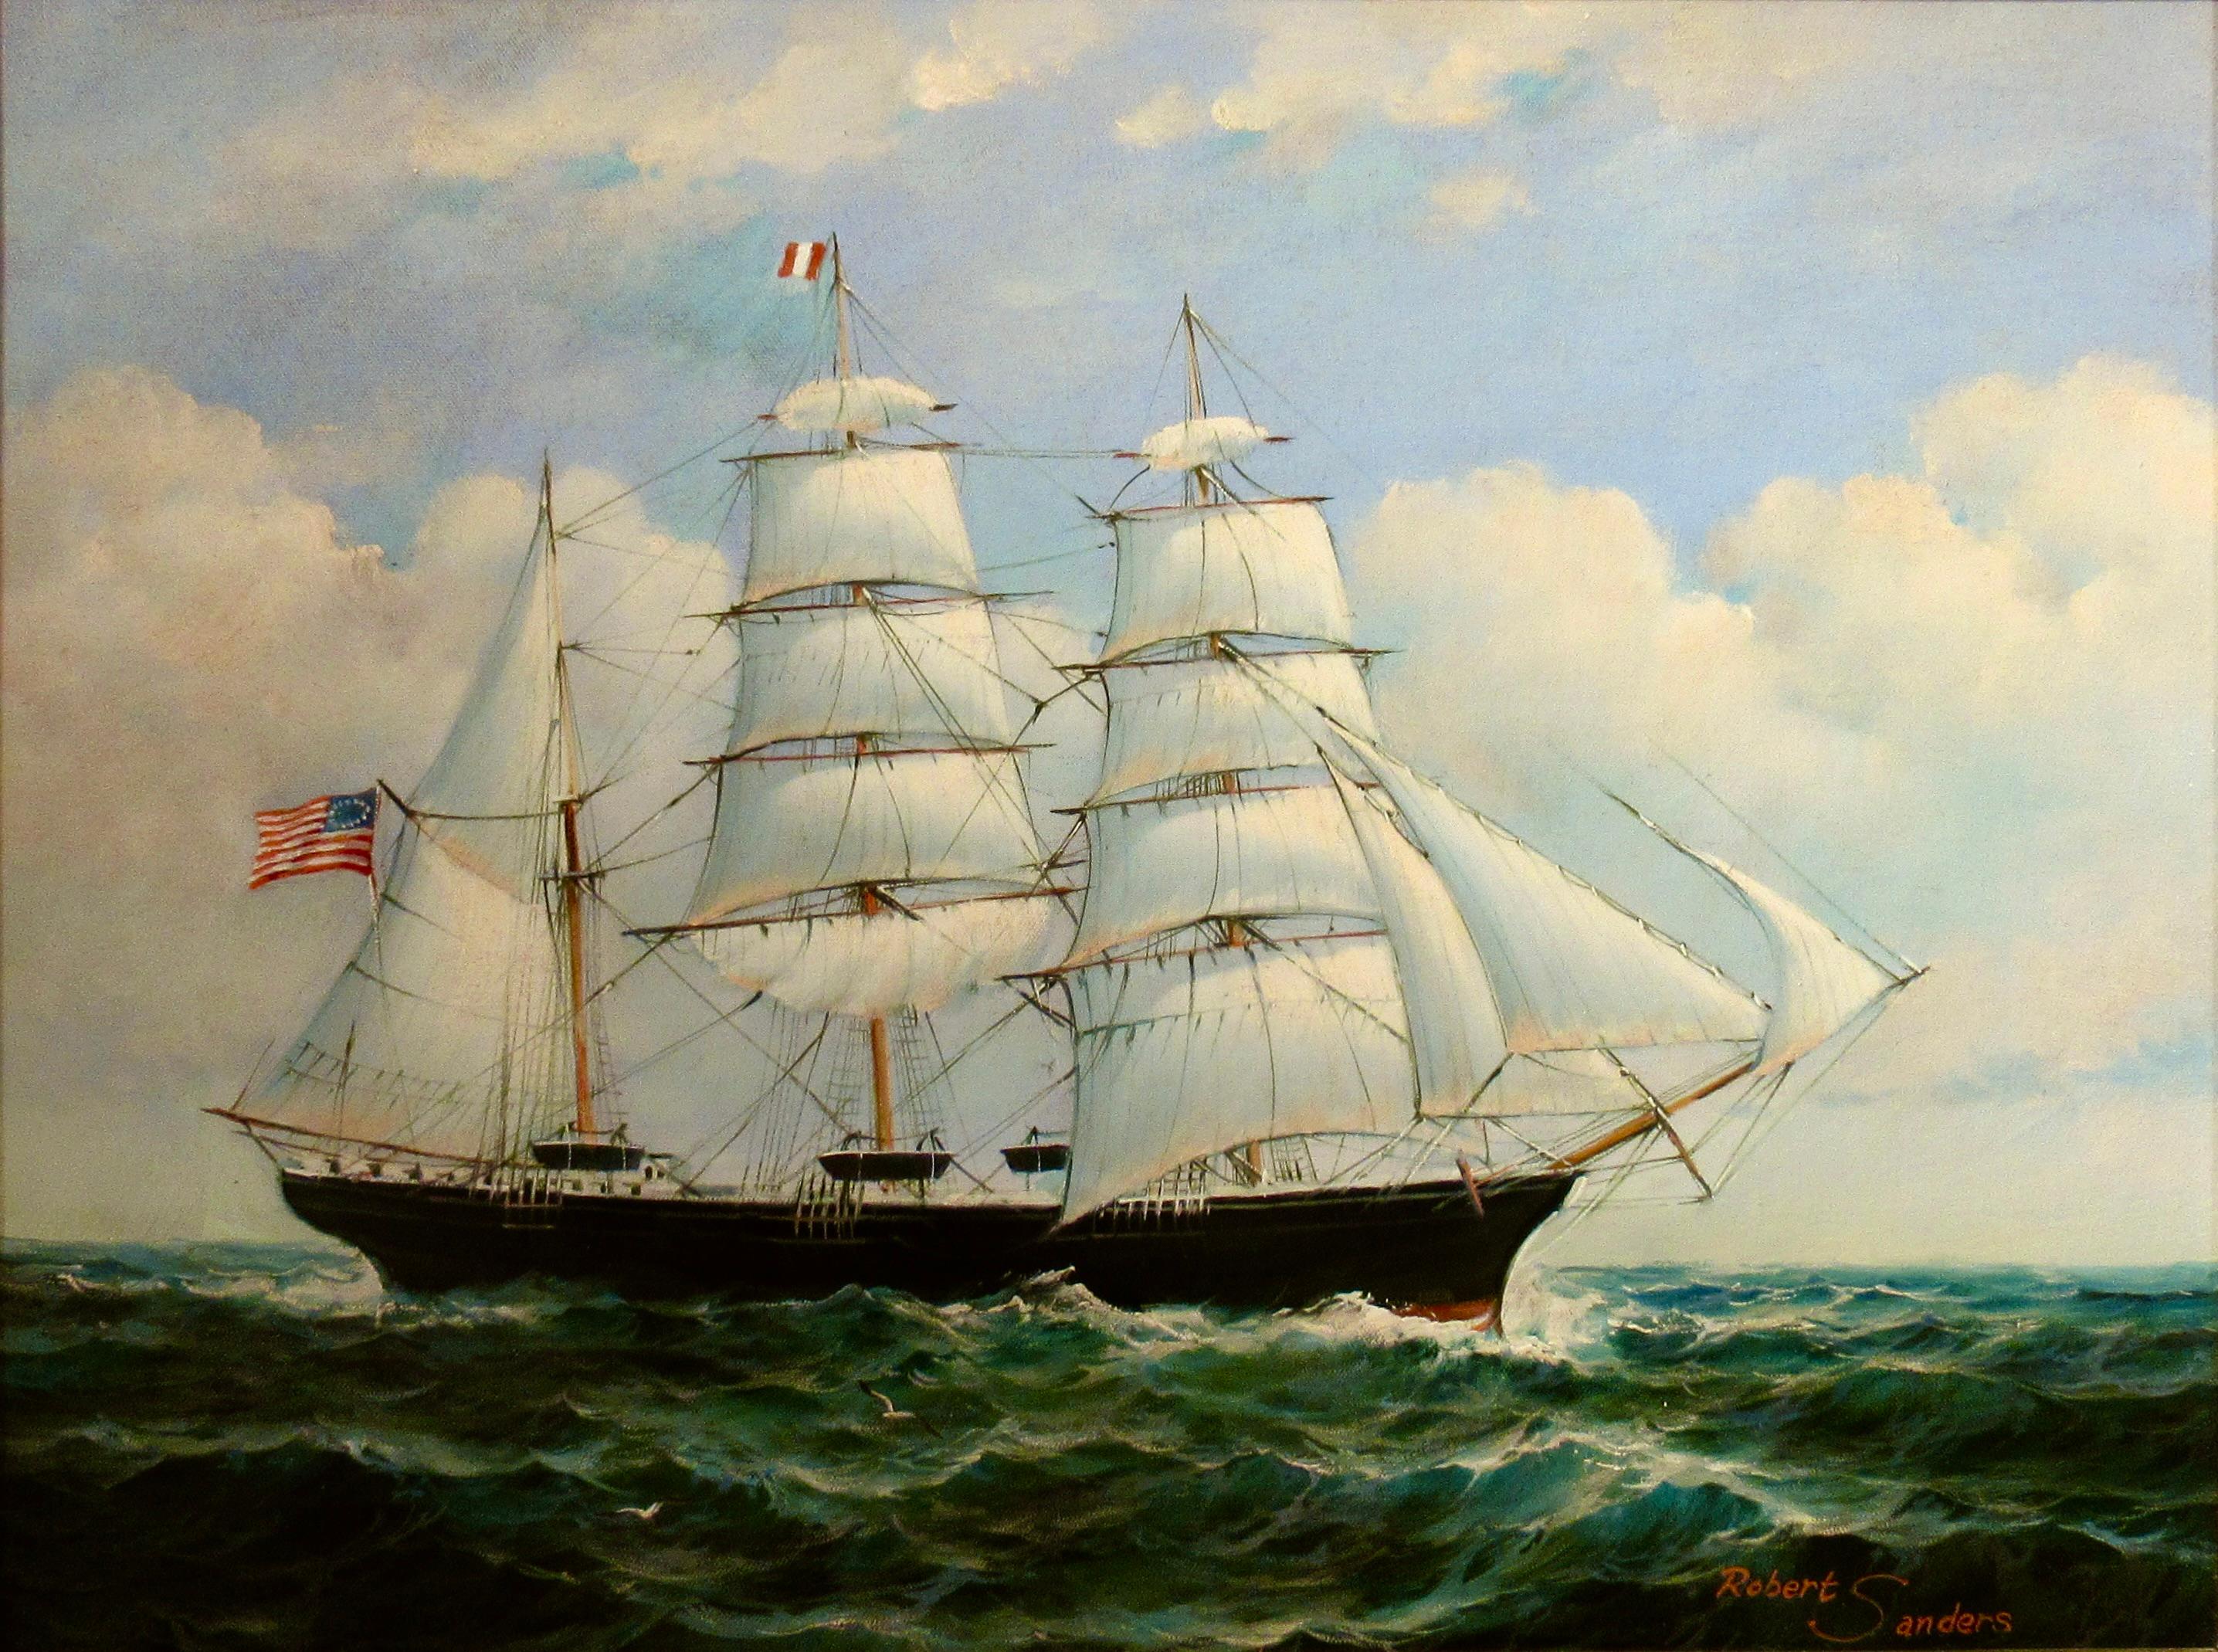 American Clipper at Sea - Painting by Robert Sanders